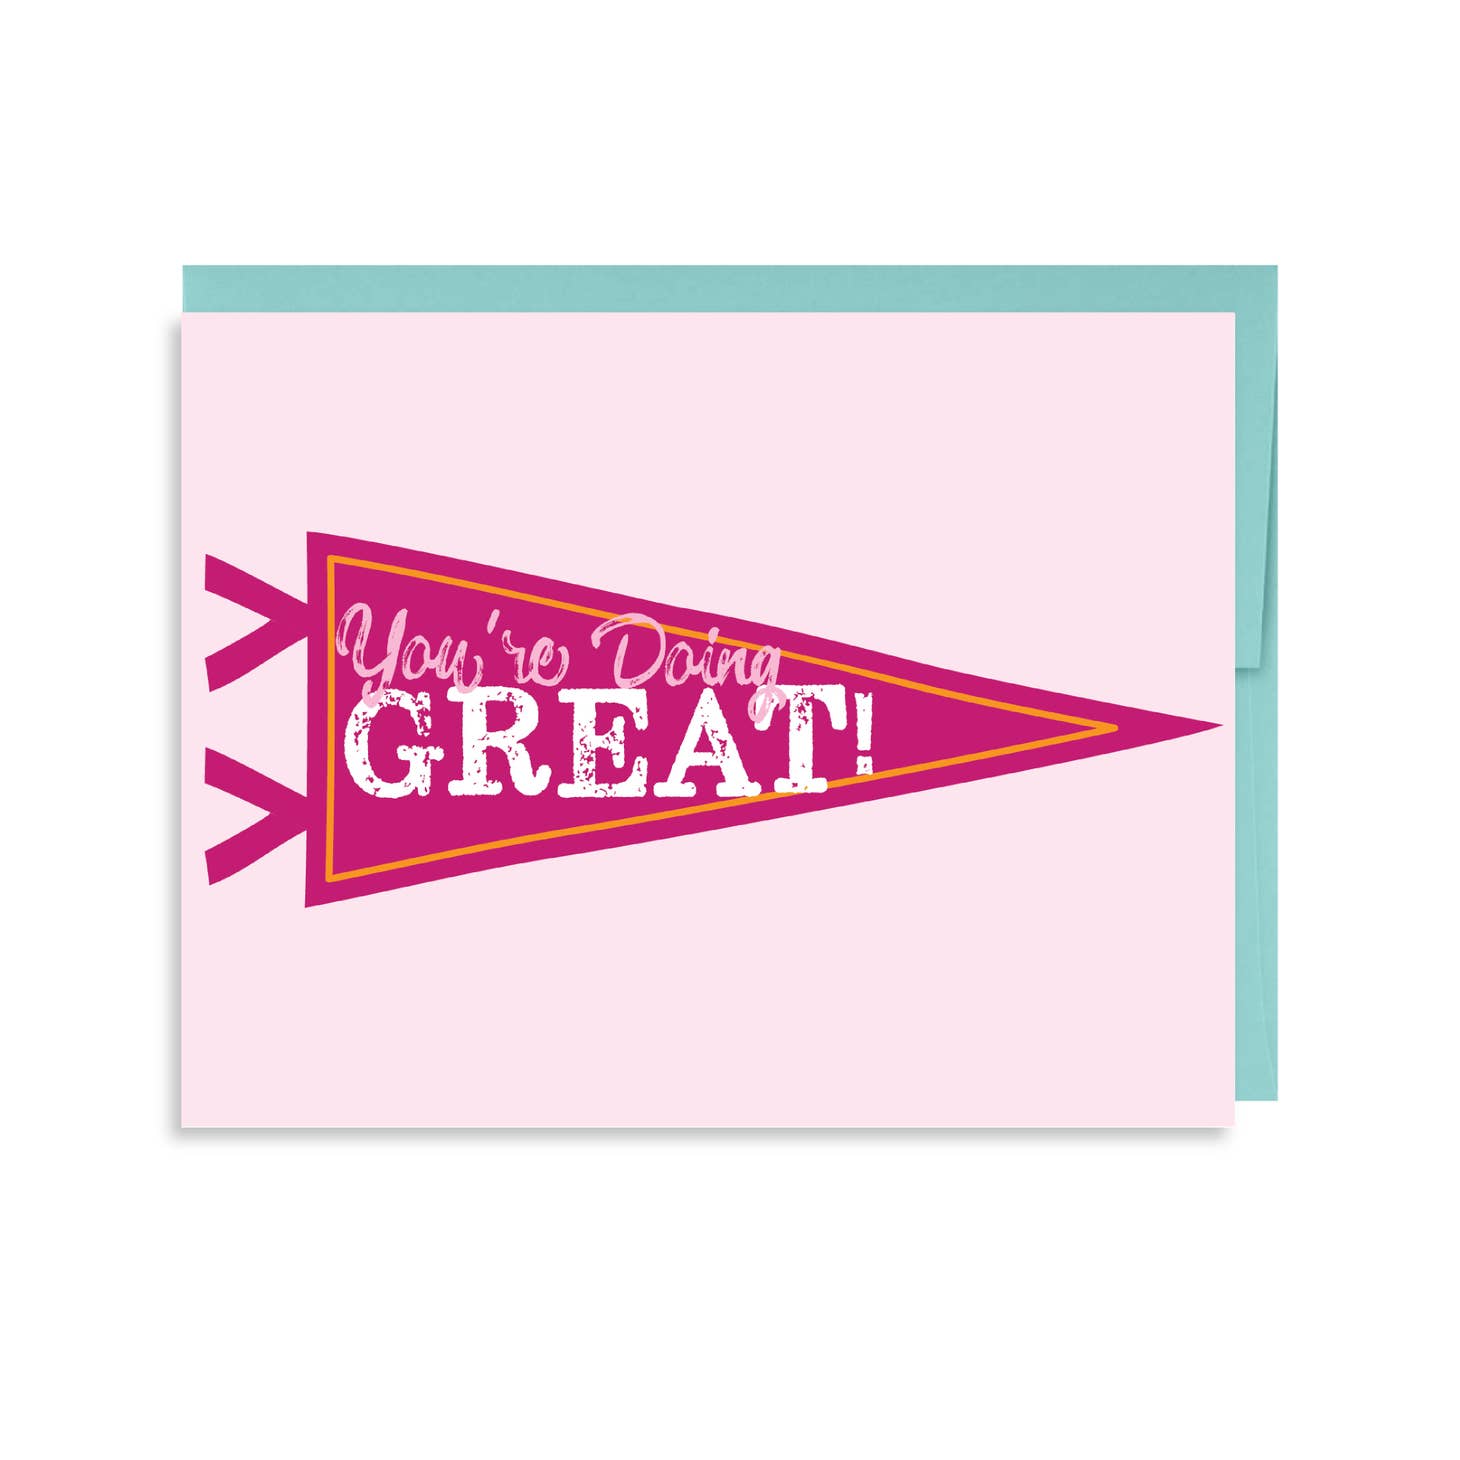 Doing Great Card - Favorite Little Things Co